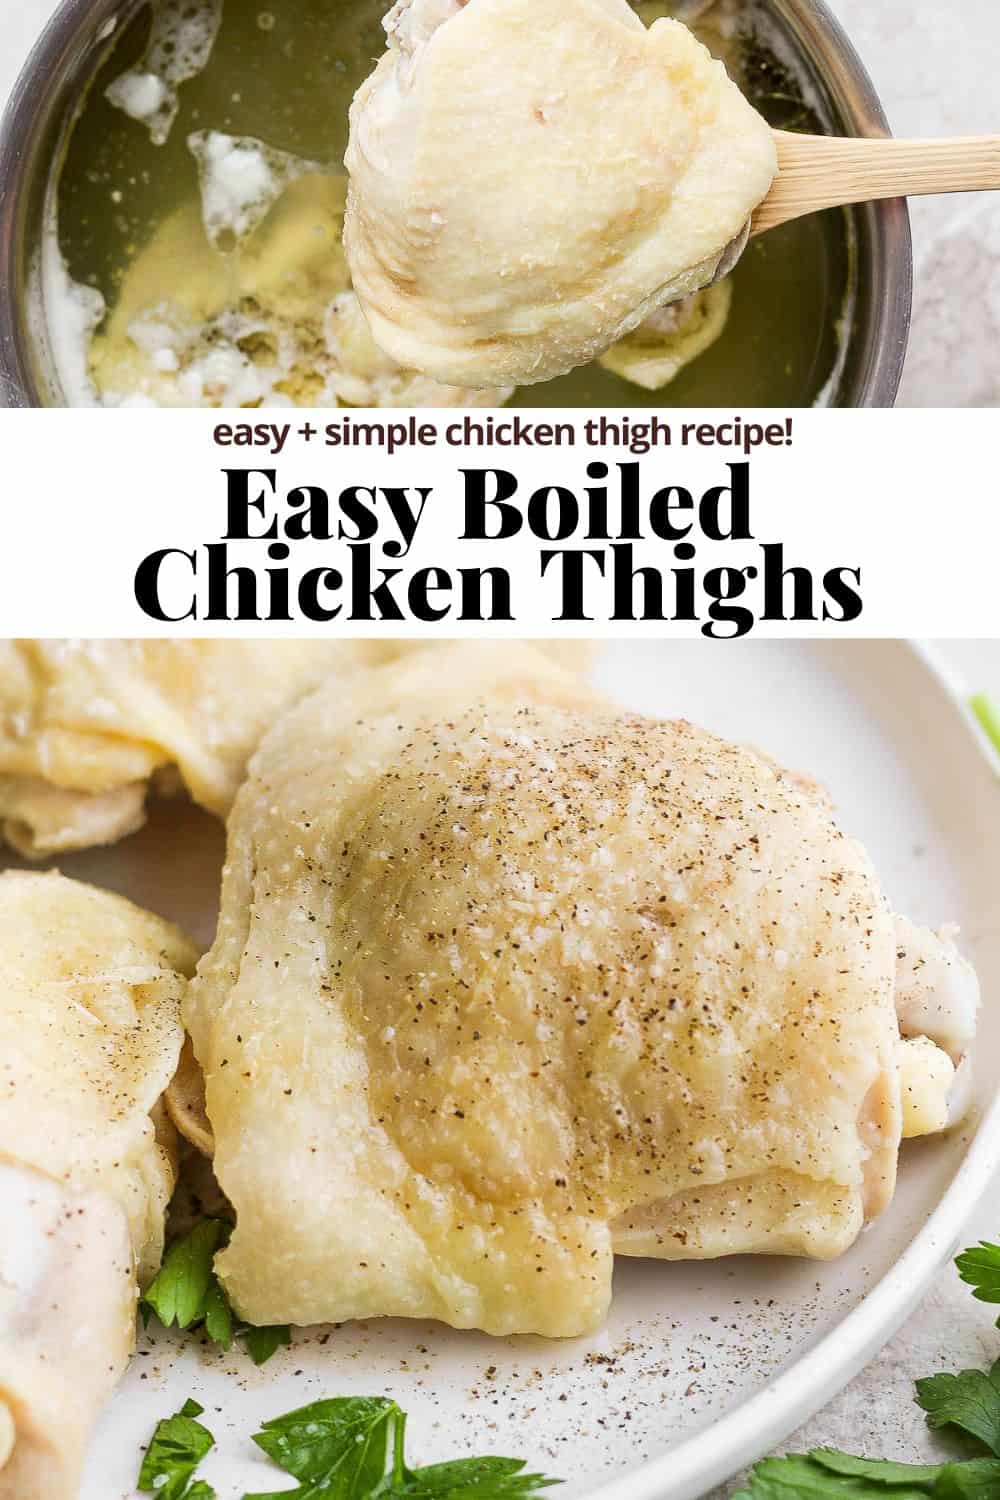 Pinterest image showing to images.  The top image shows a wooden spoon scooping out a chicken thigh out of a pot of water.  The bottom image shows a fully boiled and seasoned chicken thigh on a plate.